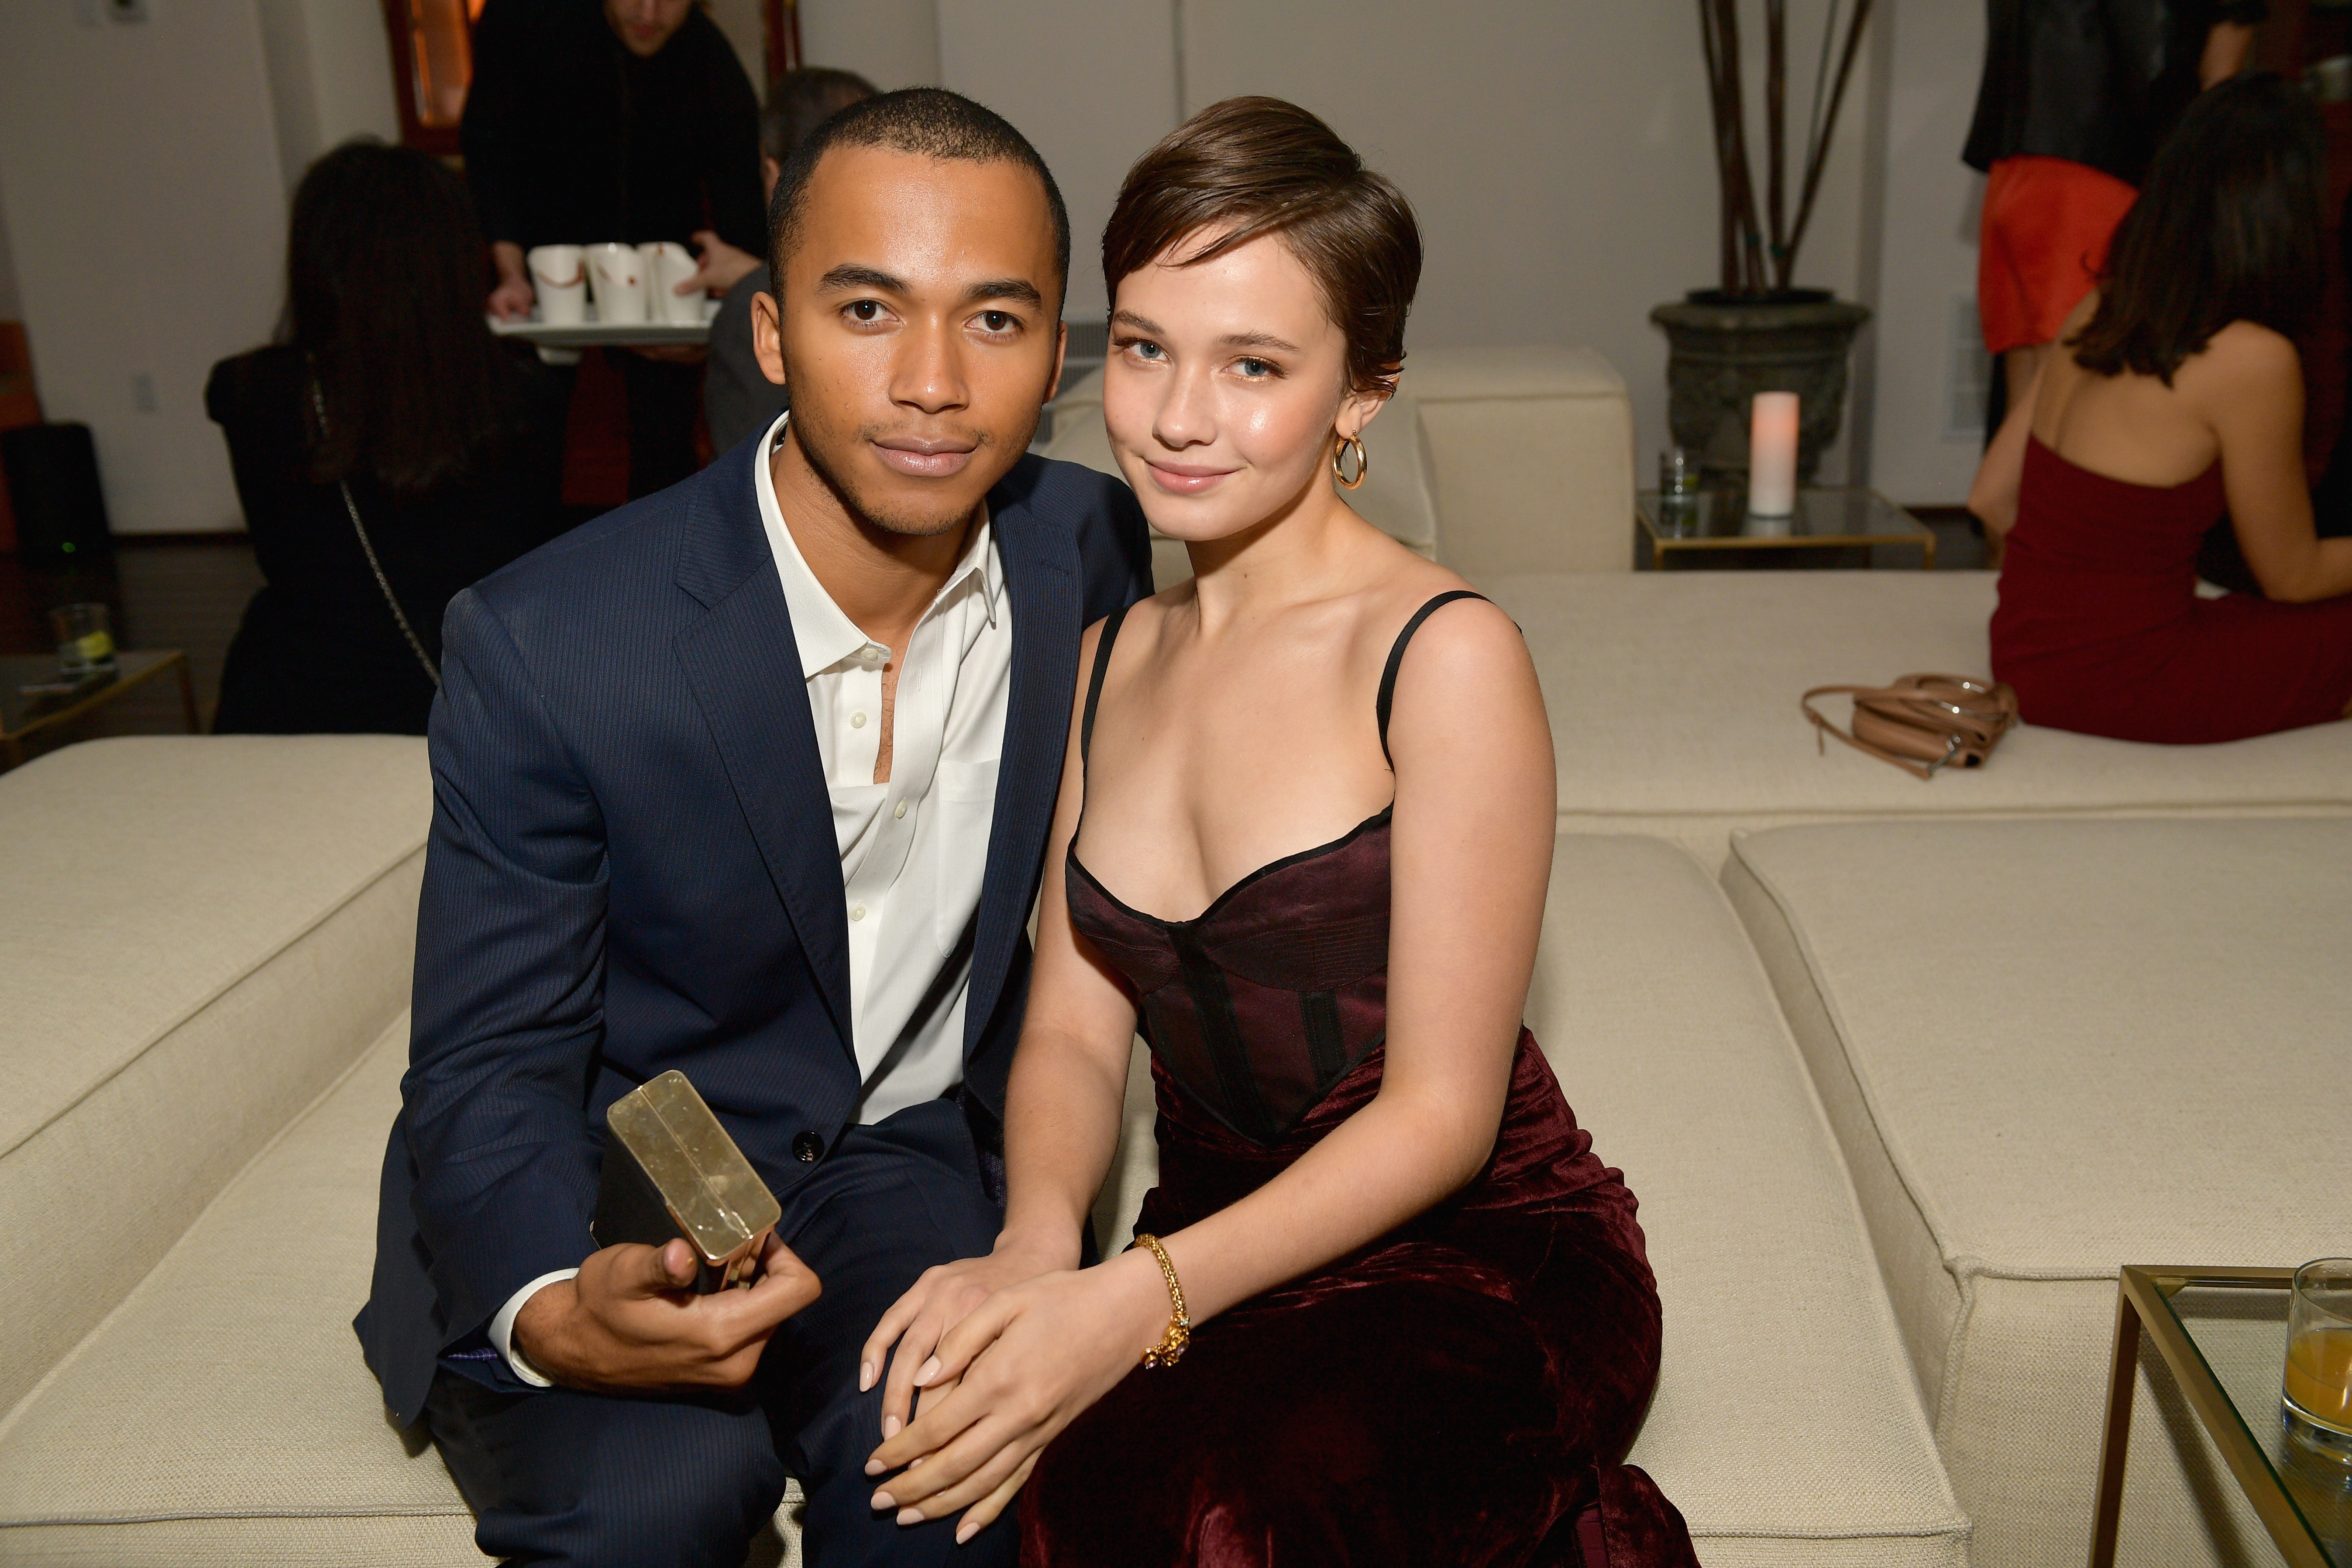 Raymond Alexander Cham Jr. and Cailee Spaeny at the 2018 GQ Men of the Year Party on December 6, 2018, in Beverly Hills, California. | Source: Getty Images